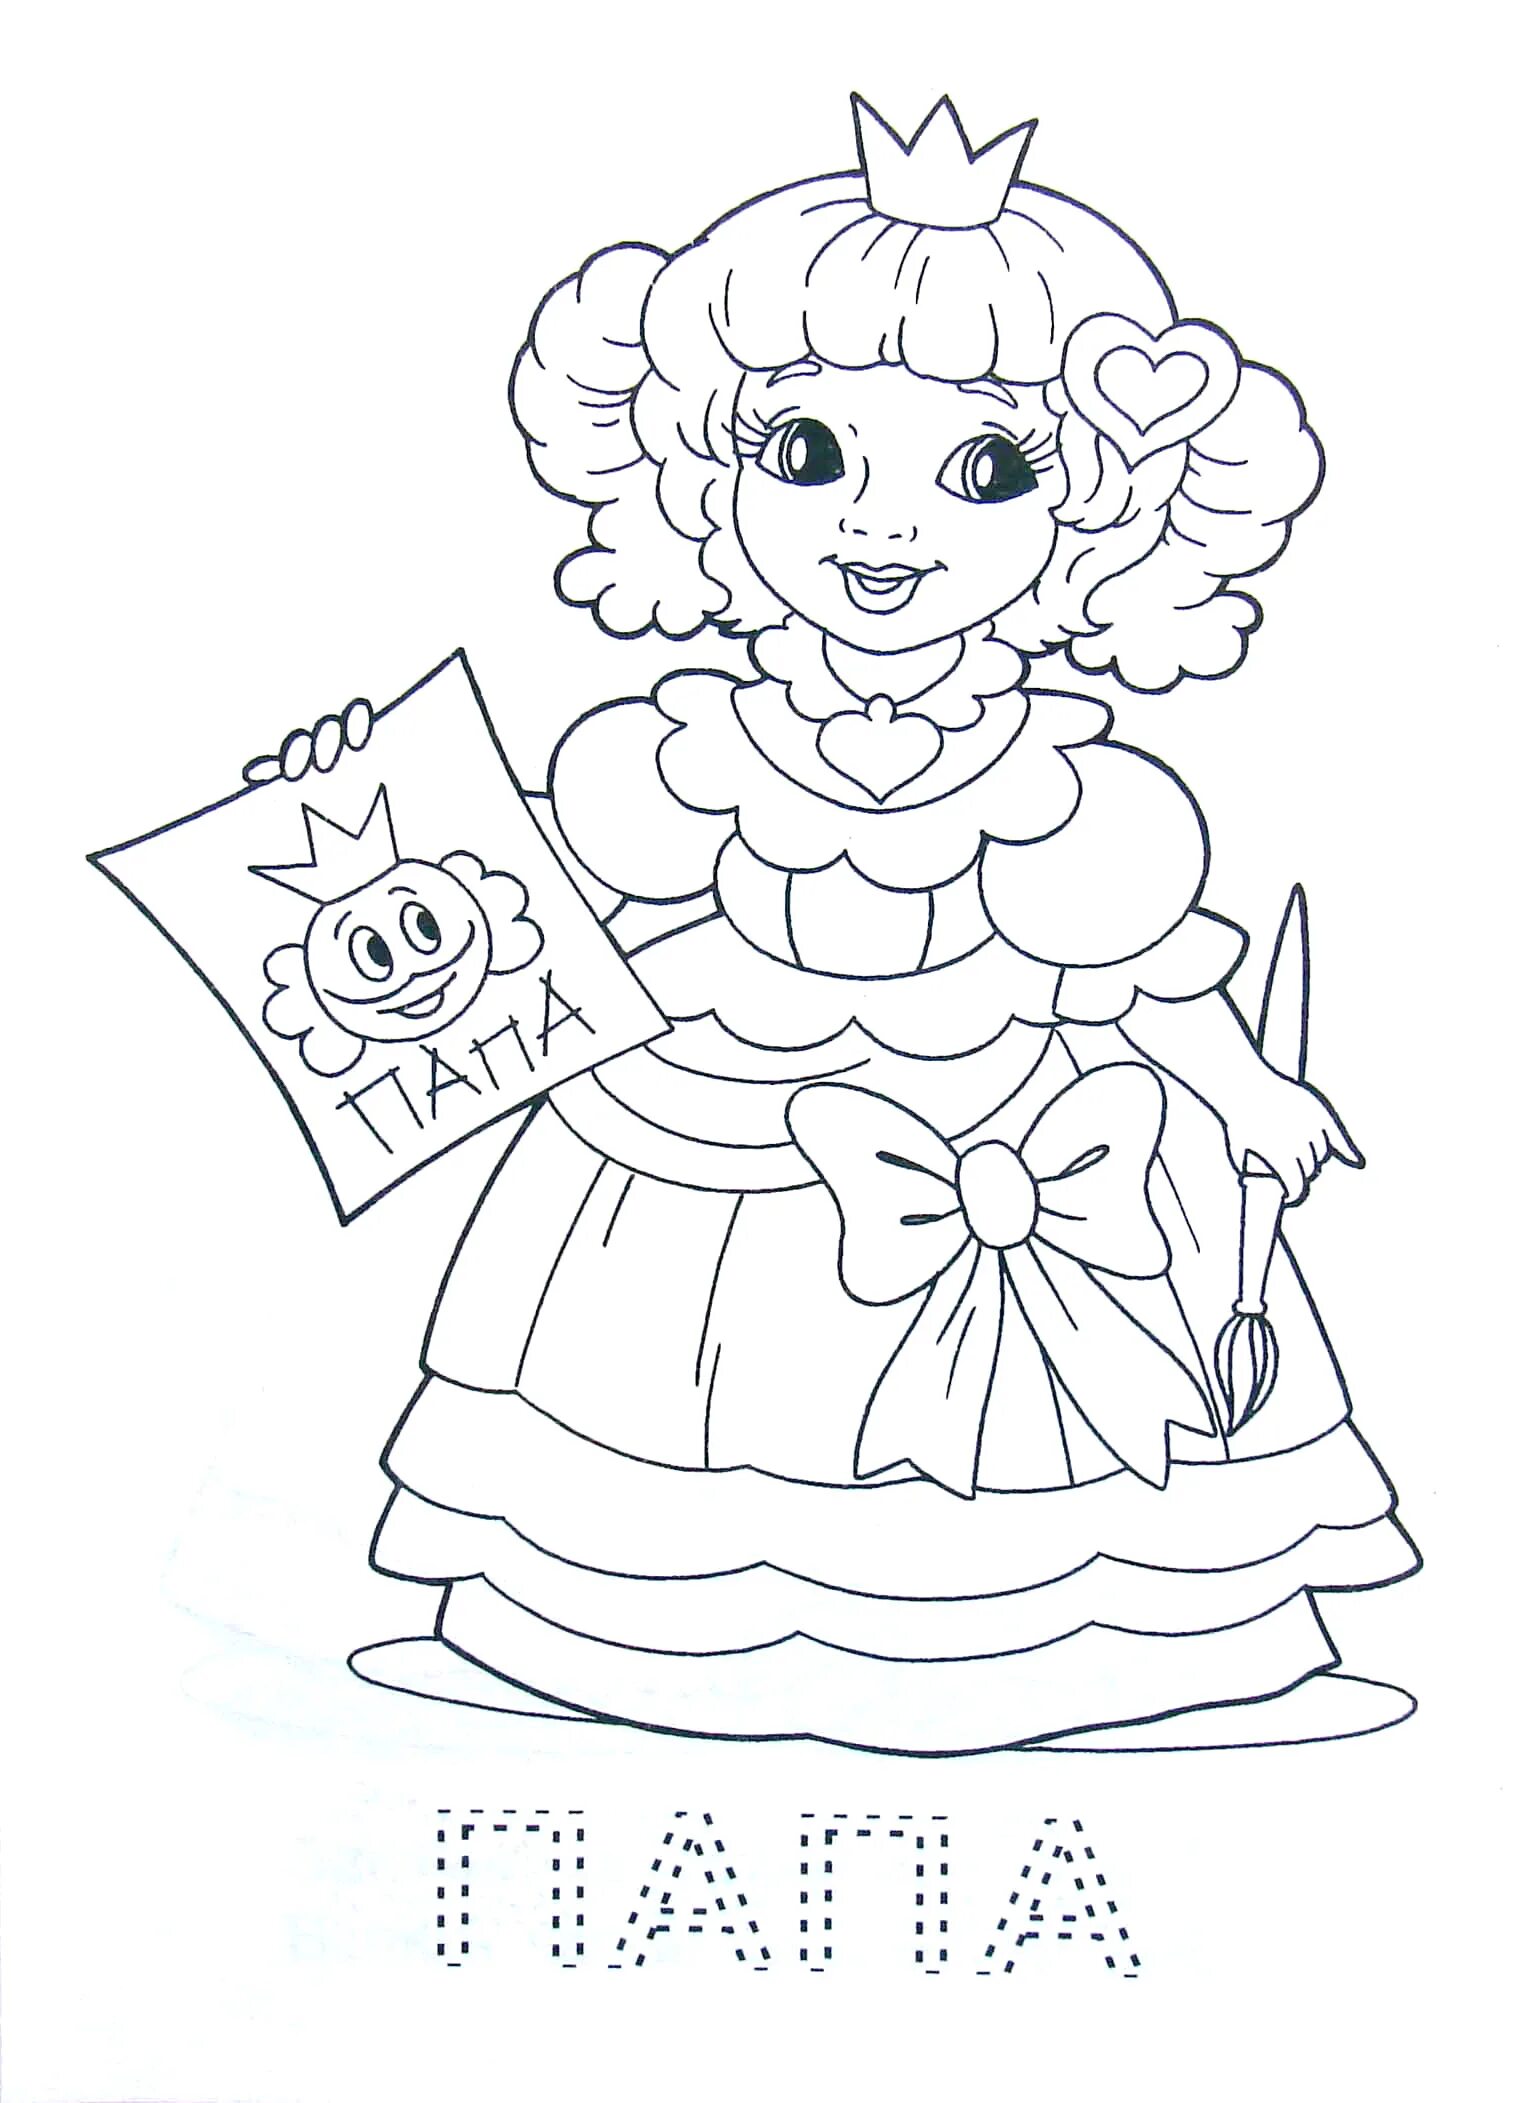 Coloring doll for 5-6 year olds